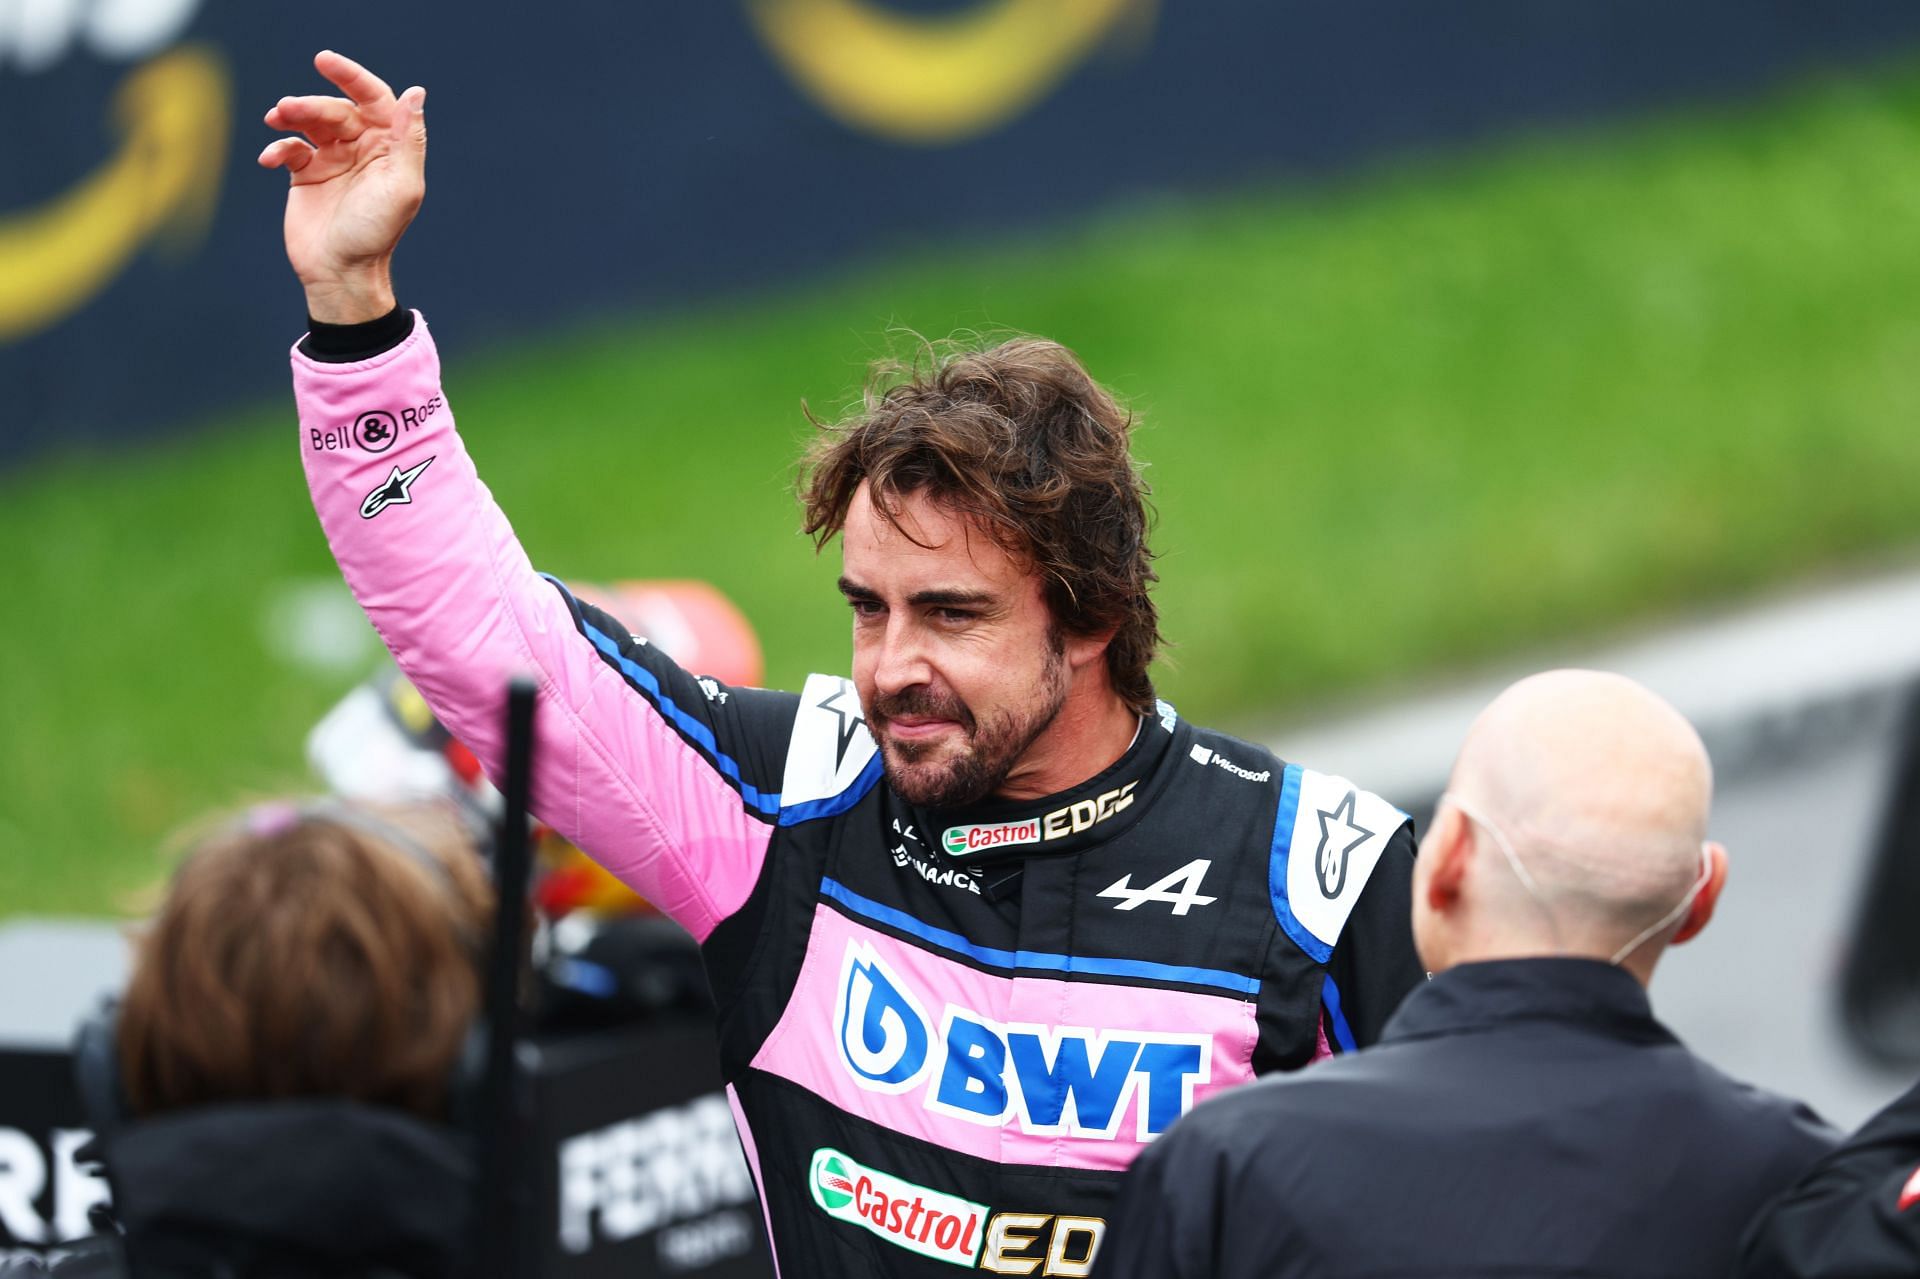 Fernando Alonso has lost a lot of points this season owing to bad luck and reliability